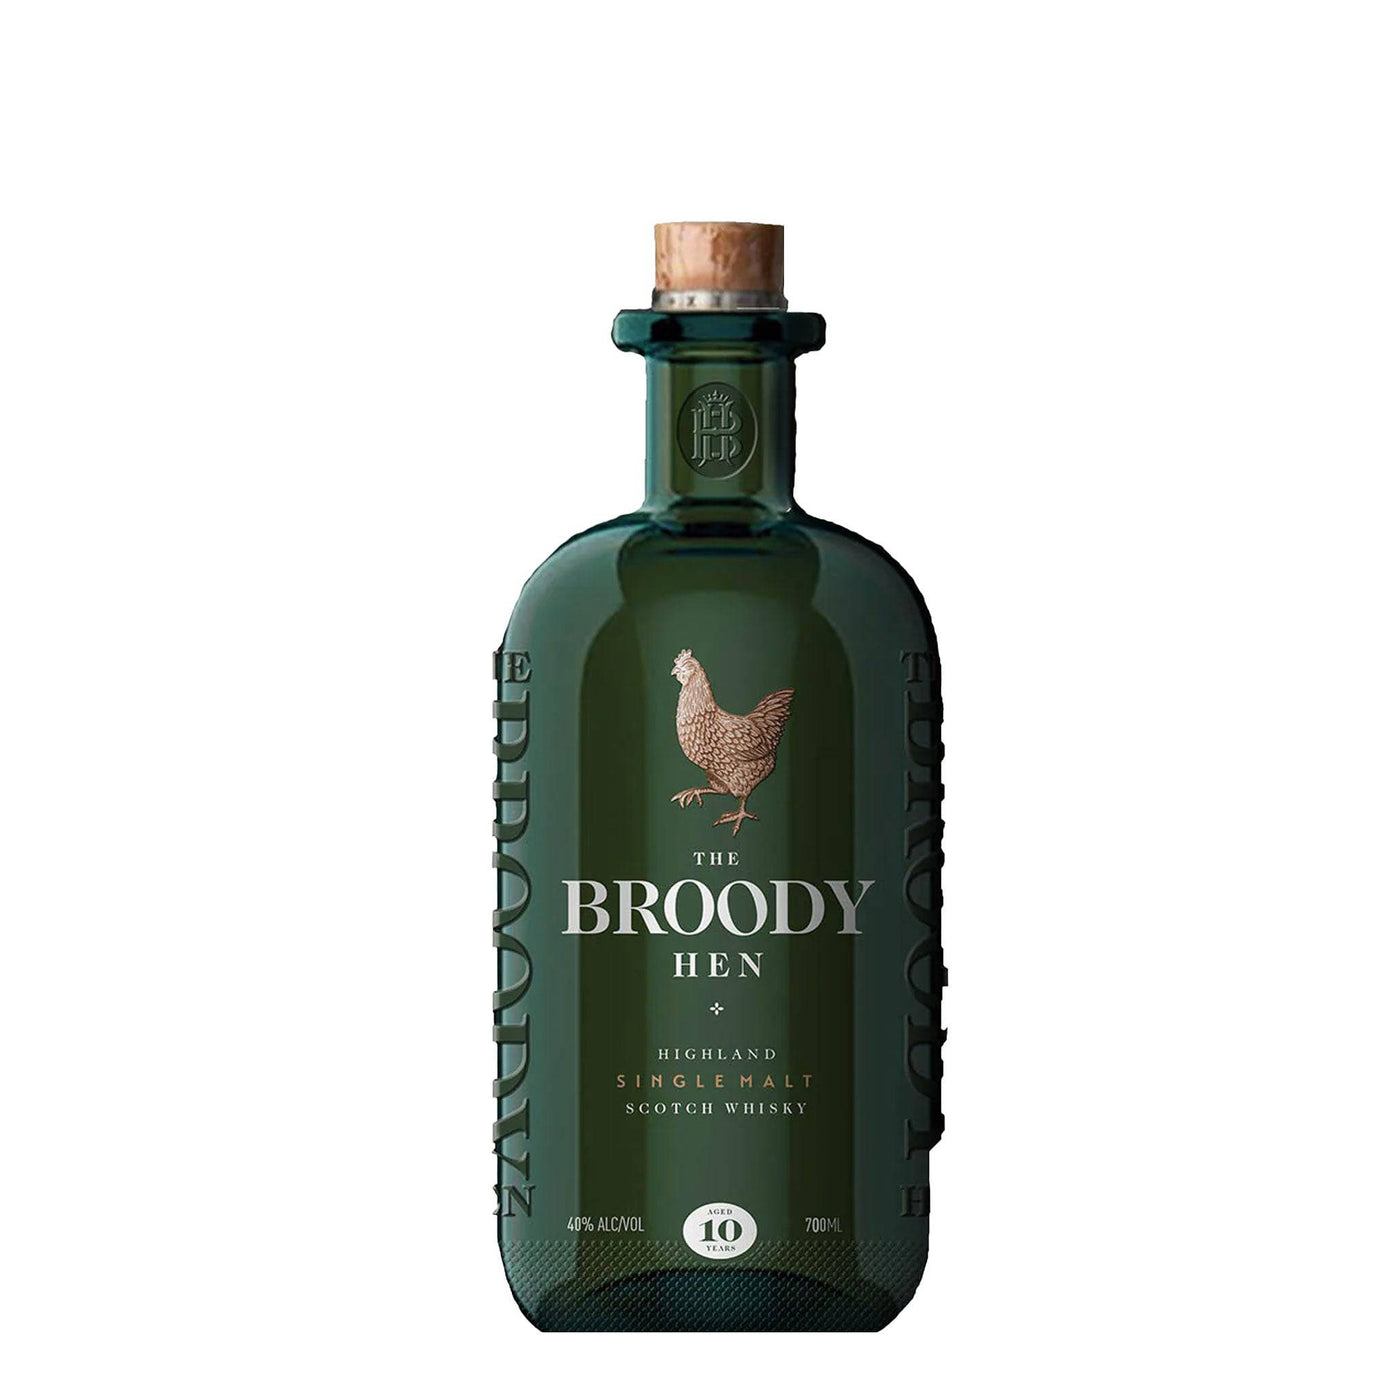 The Broody Hen 10 Year Whisky - Spiritly